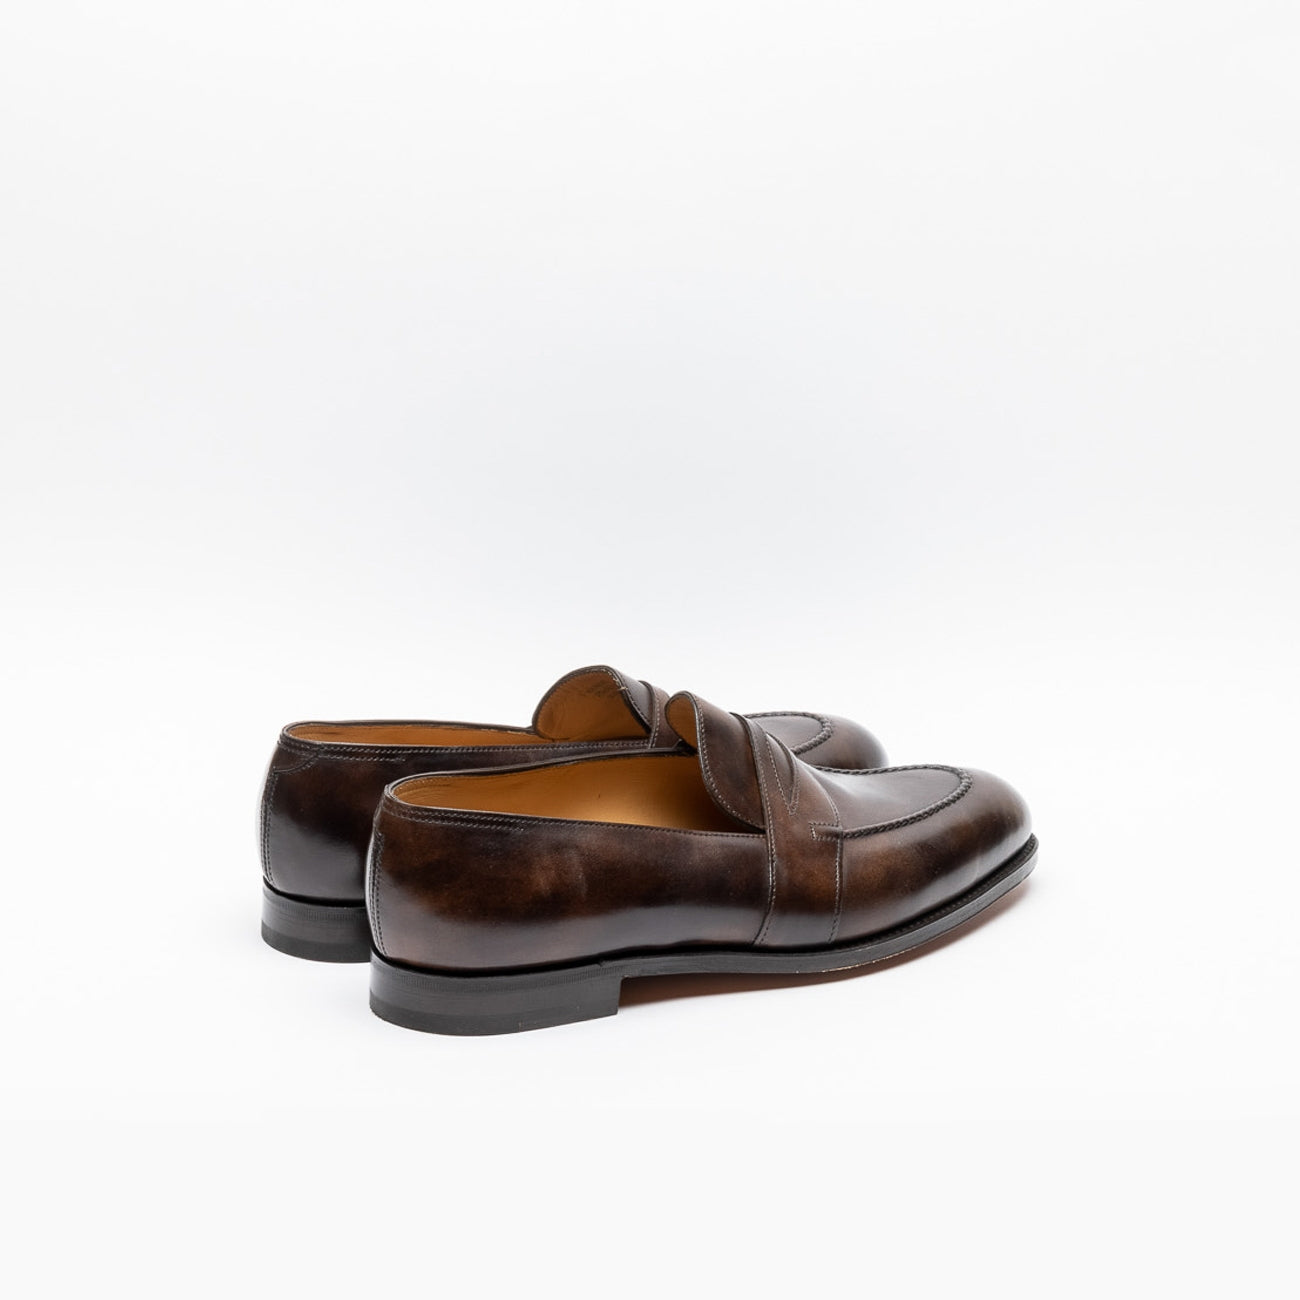 John Lobb Fencote penny loafer moccasin in brown leather